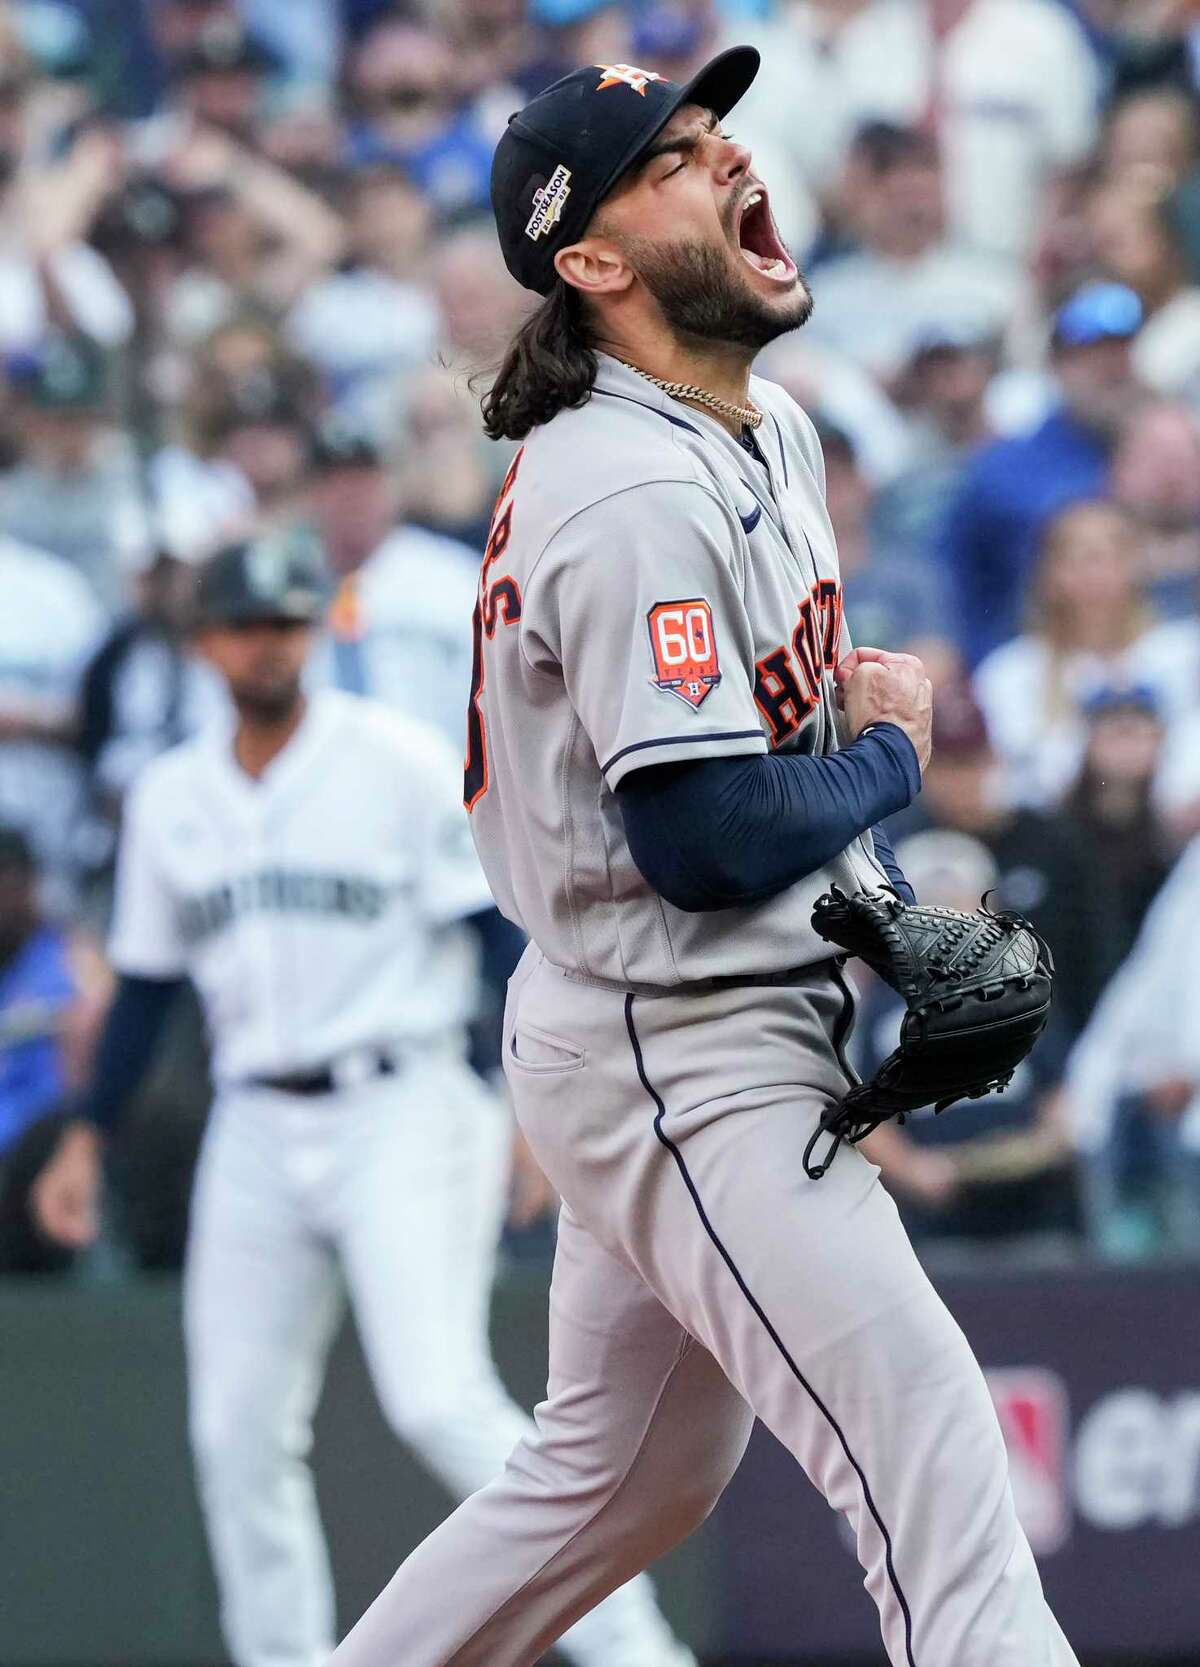 Houston Astros starting pitcher Lance McCullers Jr. reacts after striking out Seattle Mariners center fielder Julio Rodriguez to end the fifth inning of Game 3 of the American League Division Series on Saturday, Oct. 15, 2022, in Seattle.